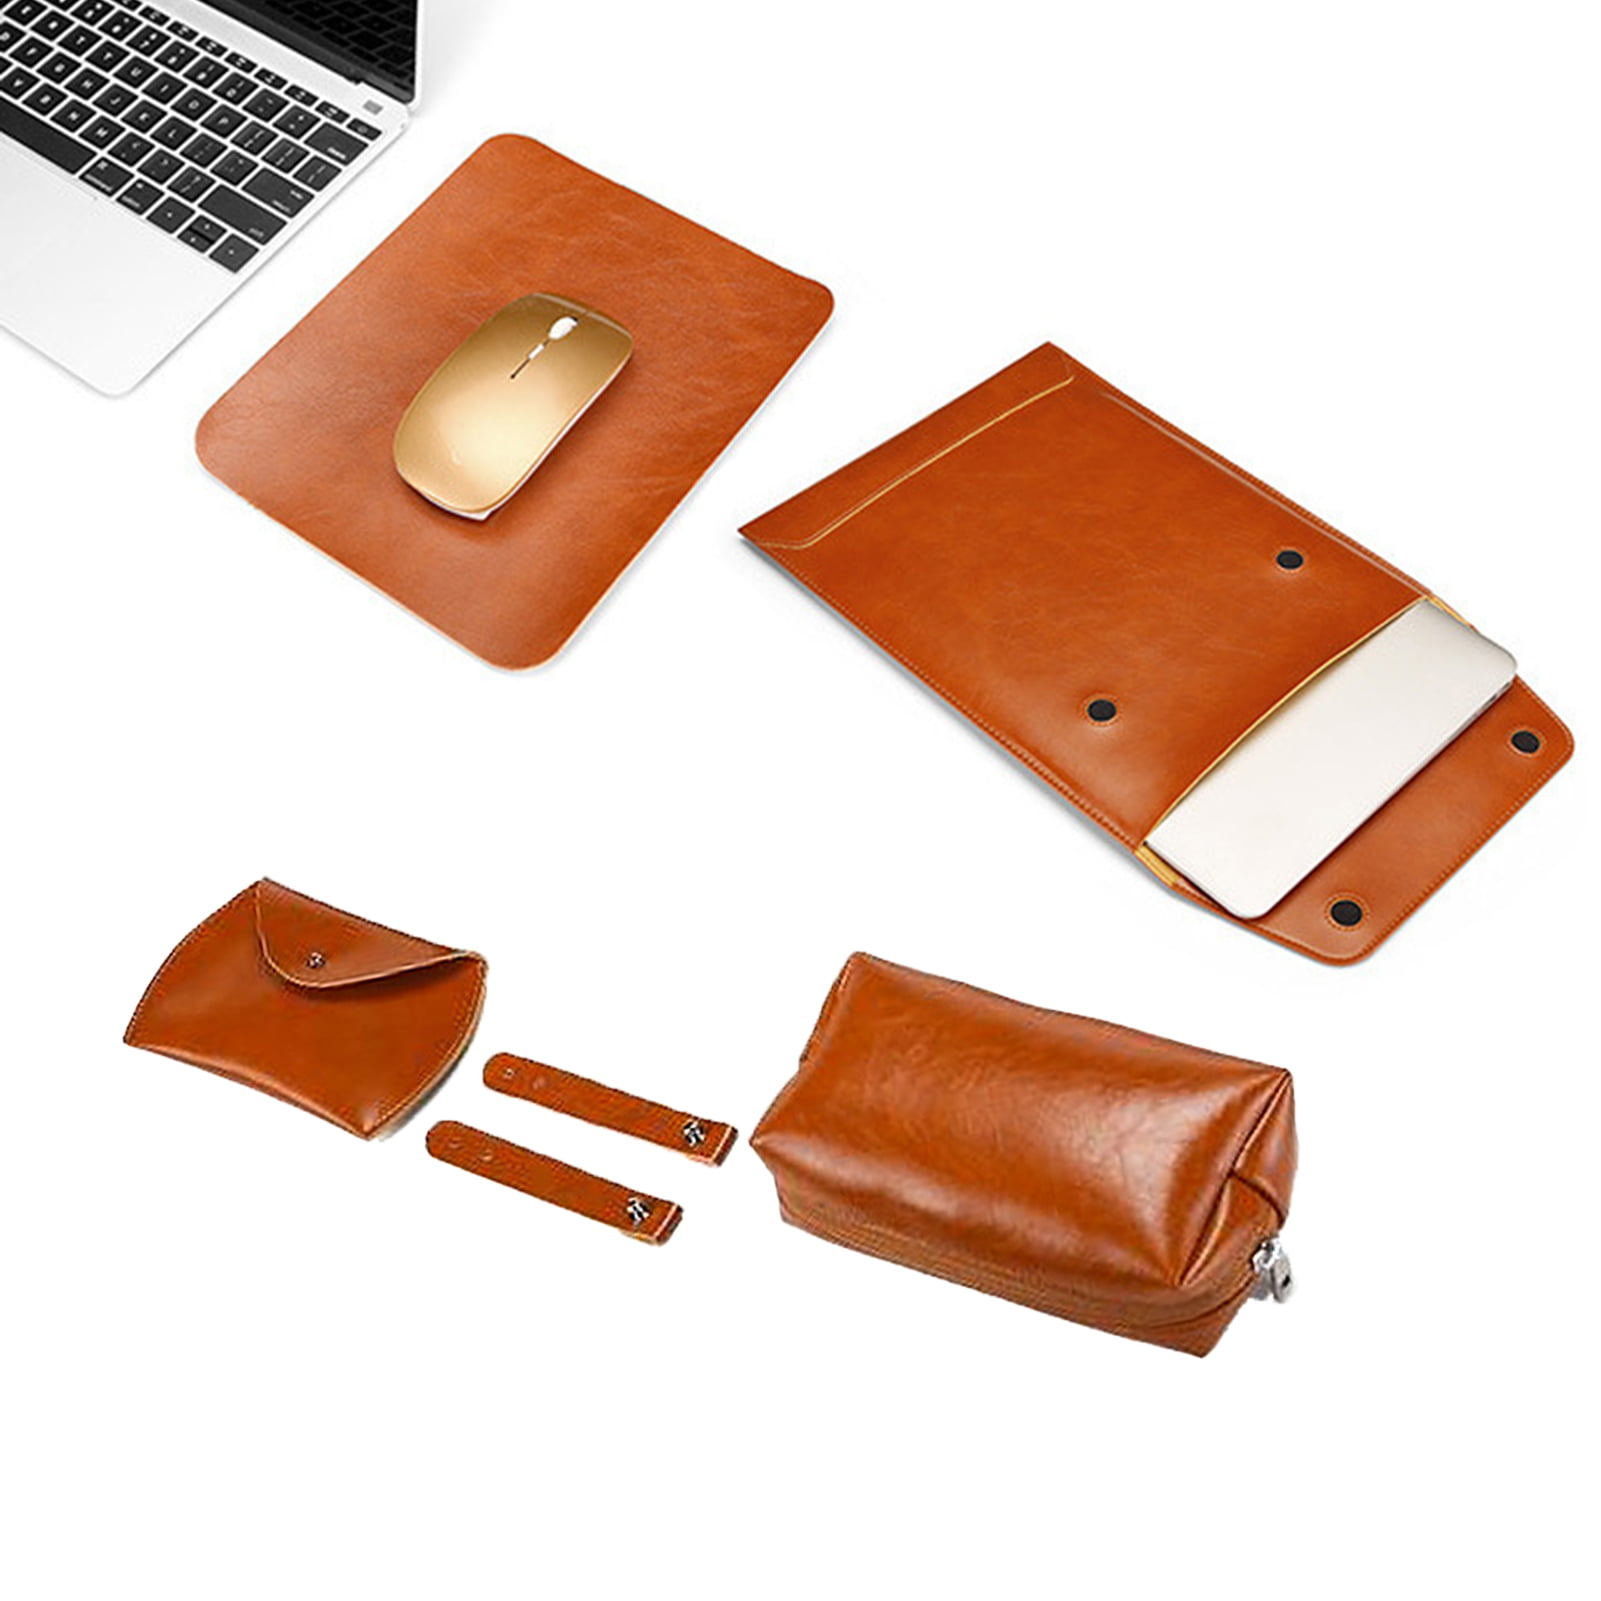 US 2019 Envelope Laptop Leather Sleeve Bag Case Cover for 11"12"13" 14" Notebook 